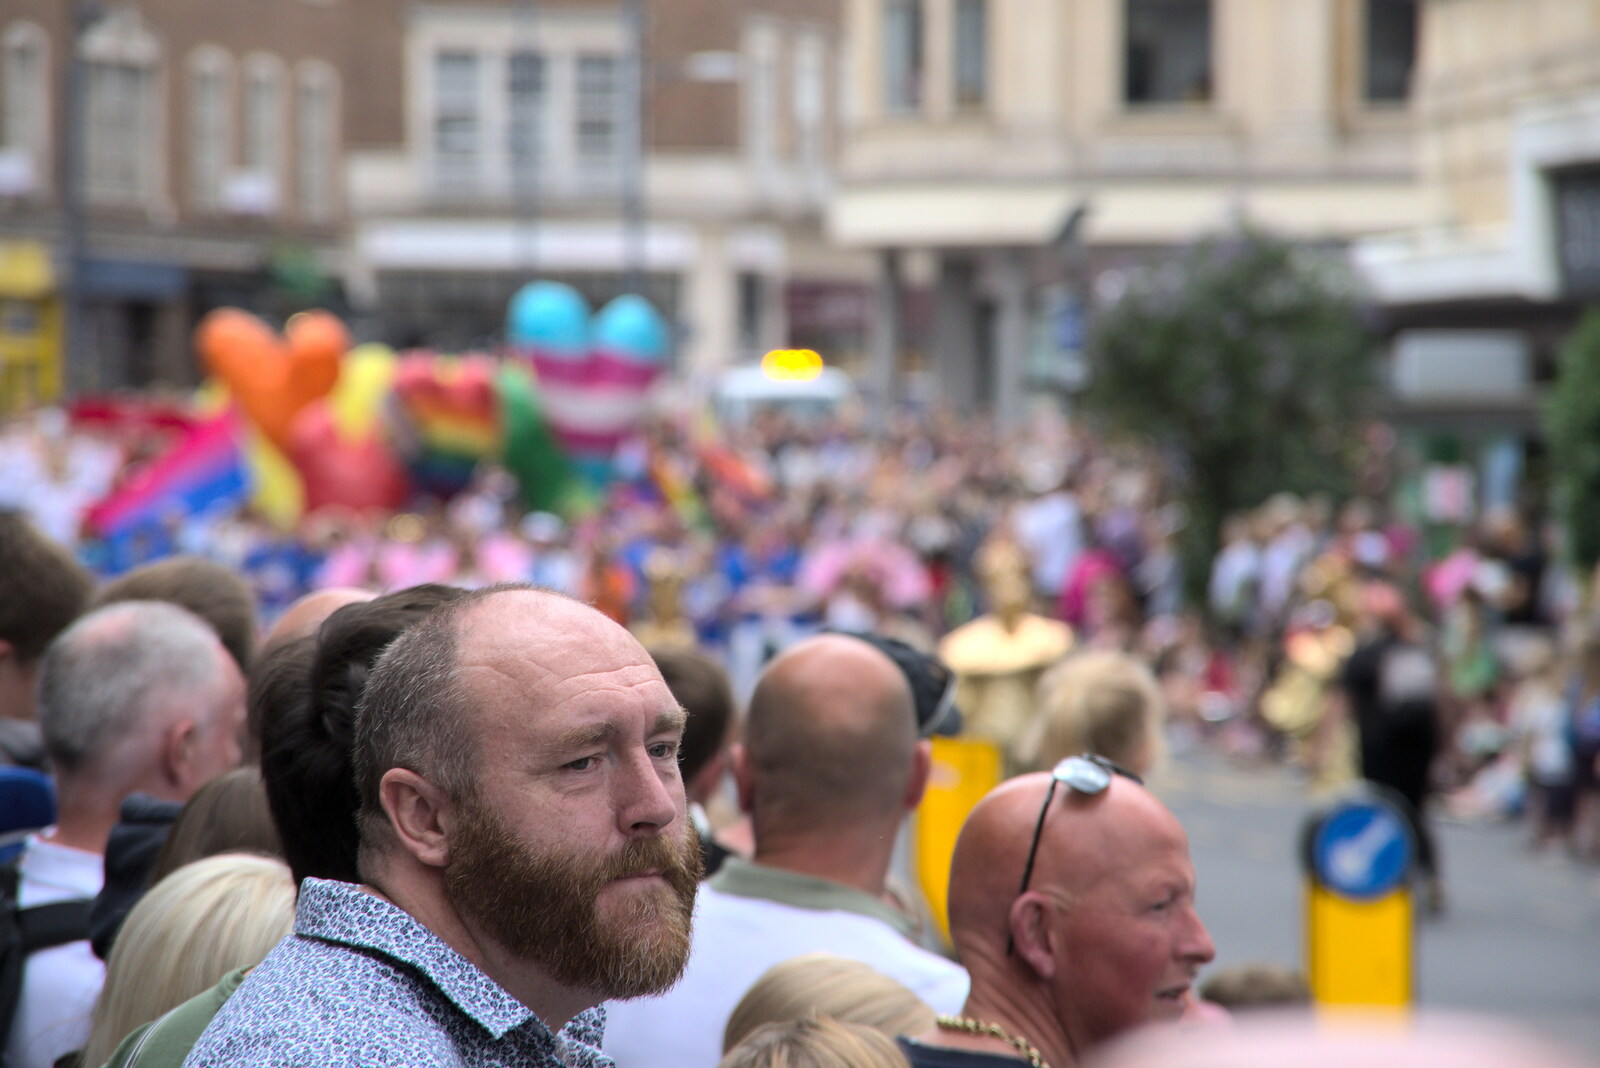 Looking out over the parade from The Lord Mayor's Procession, Norwich, Norfolk - 2nd July 2022